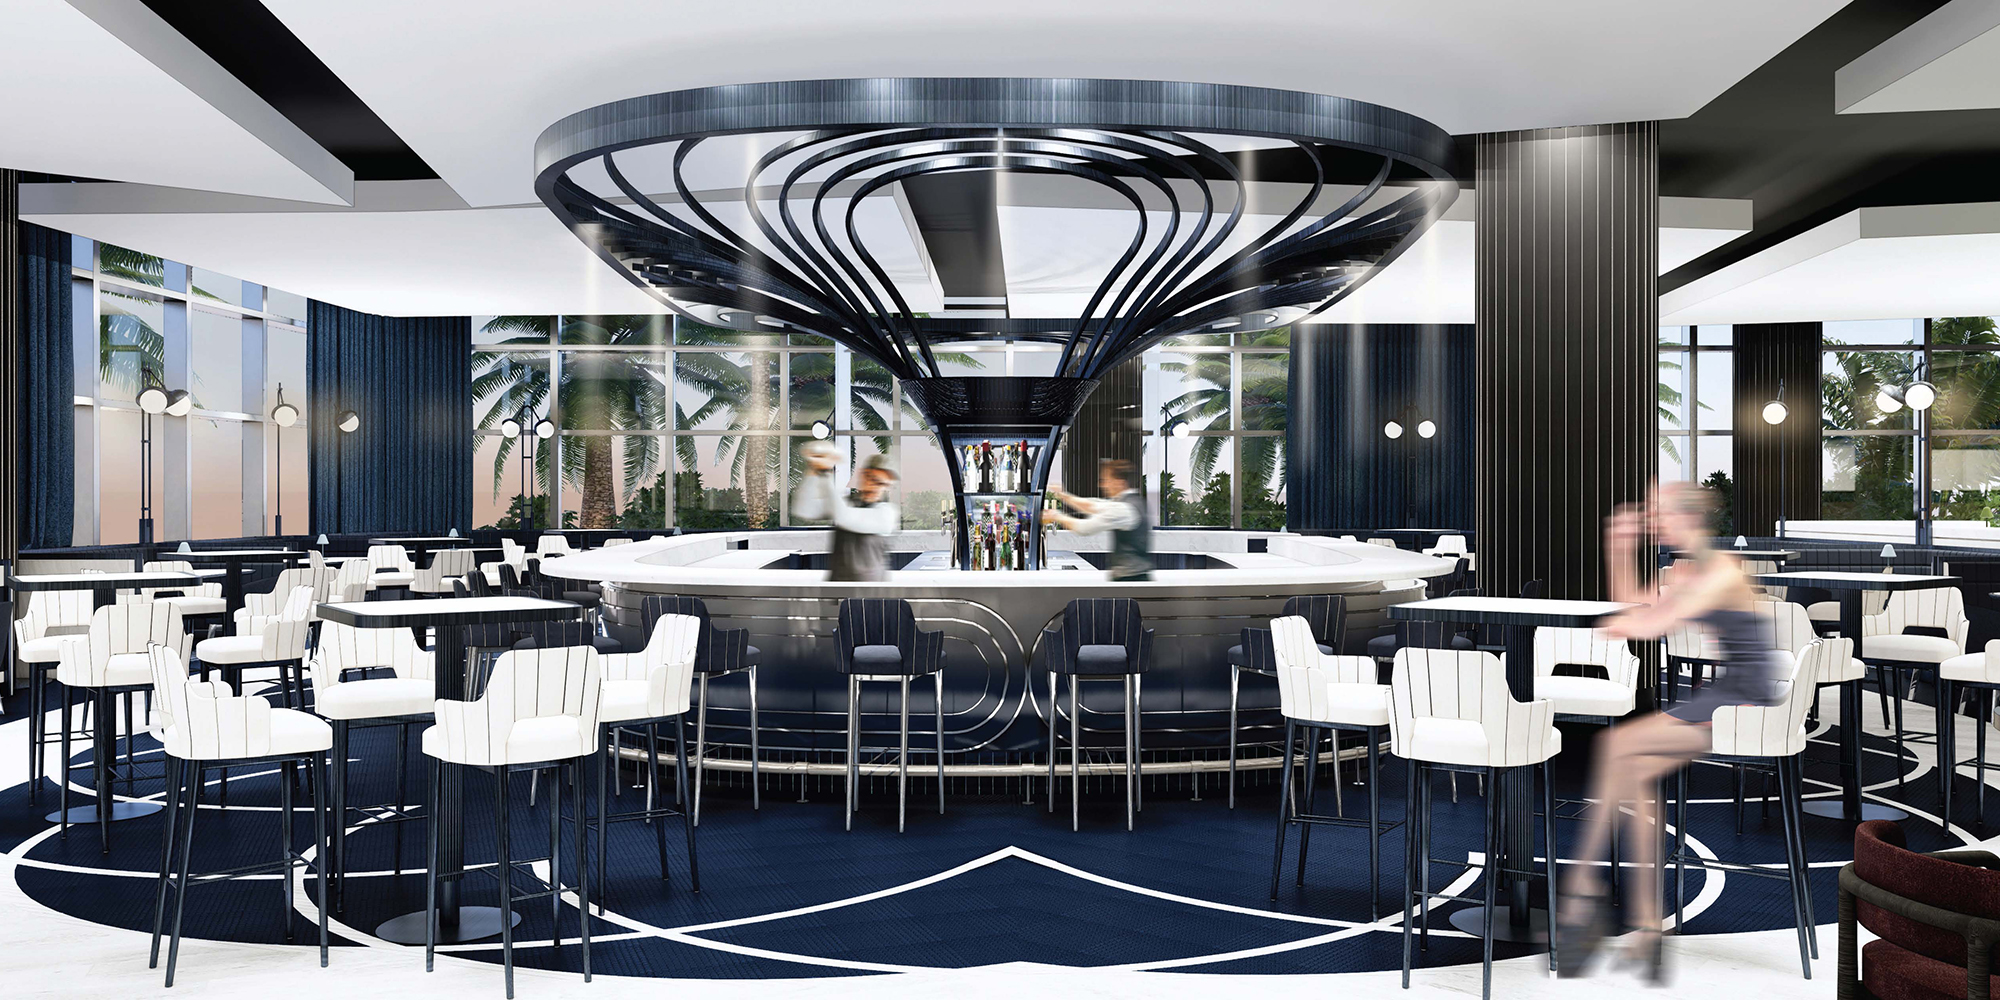 Evolving the concept of buffet dining to new heights of sophistication, Studio Munge delivers multifaceted Superfood in Las Vegas' ARIA Resort & Casino.